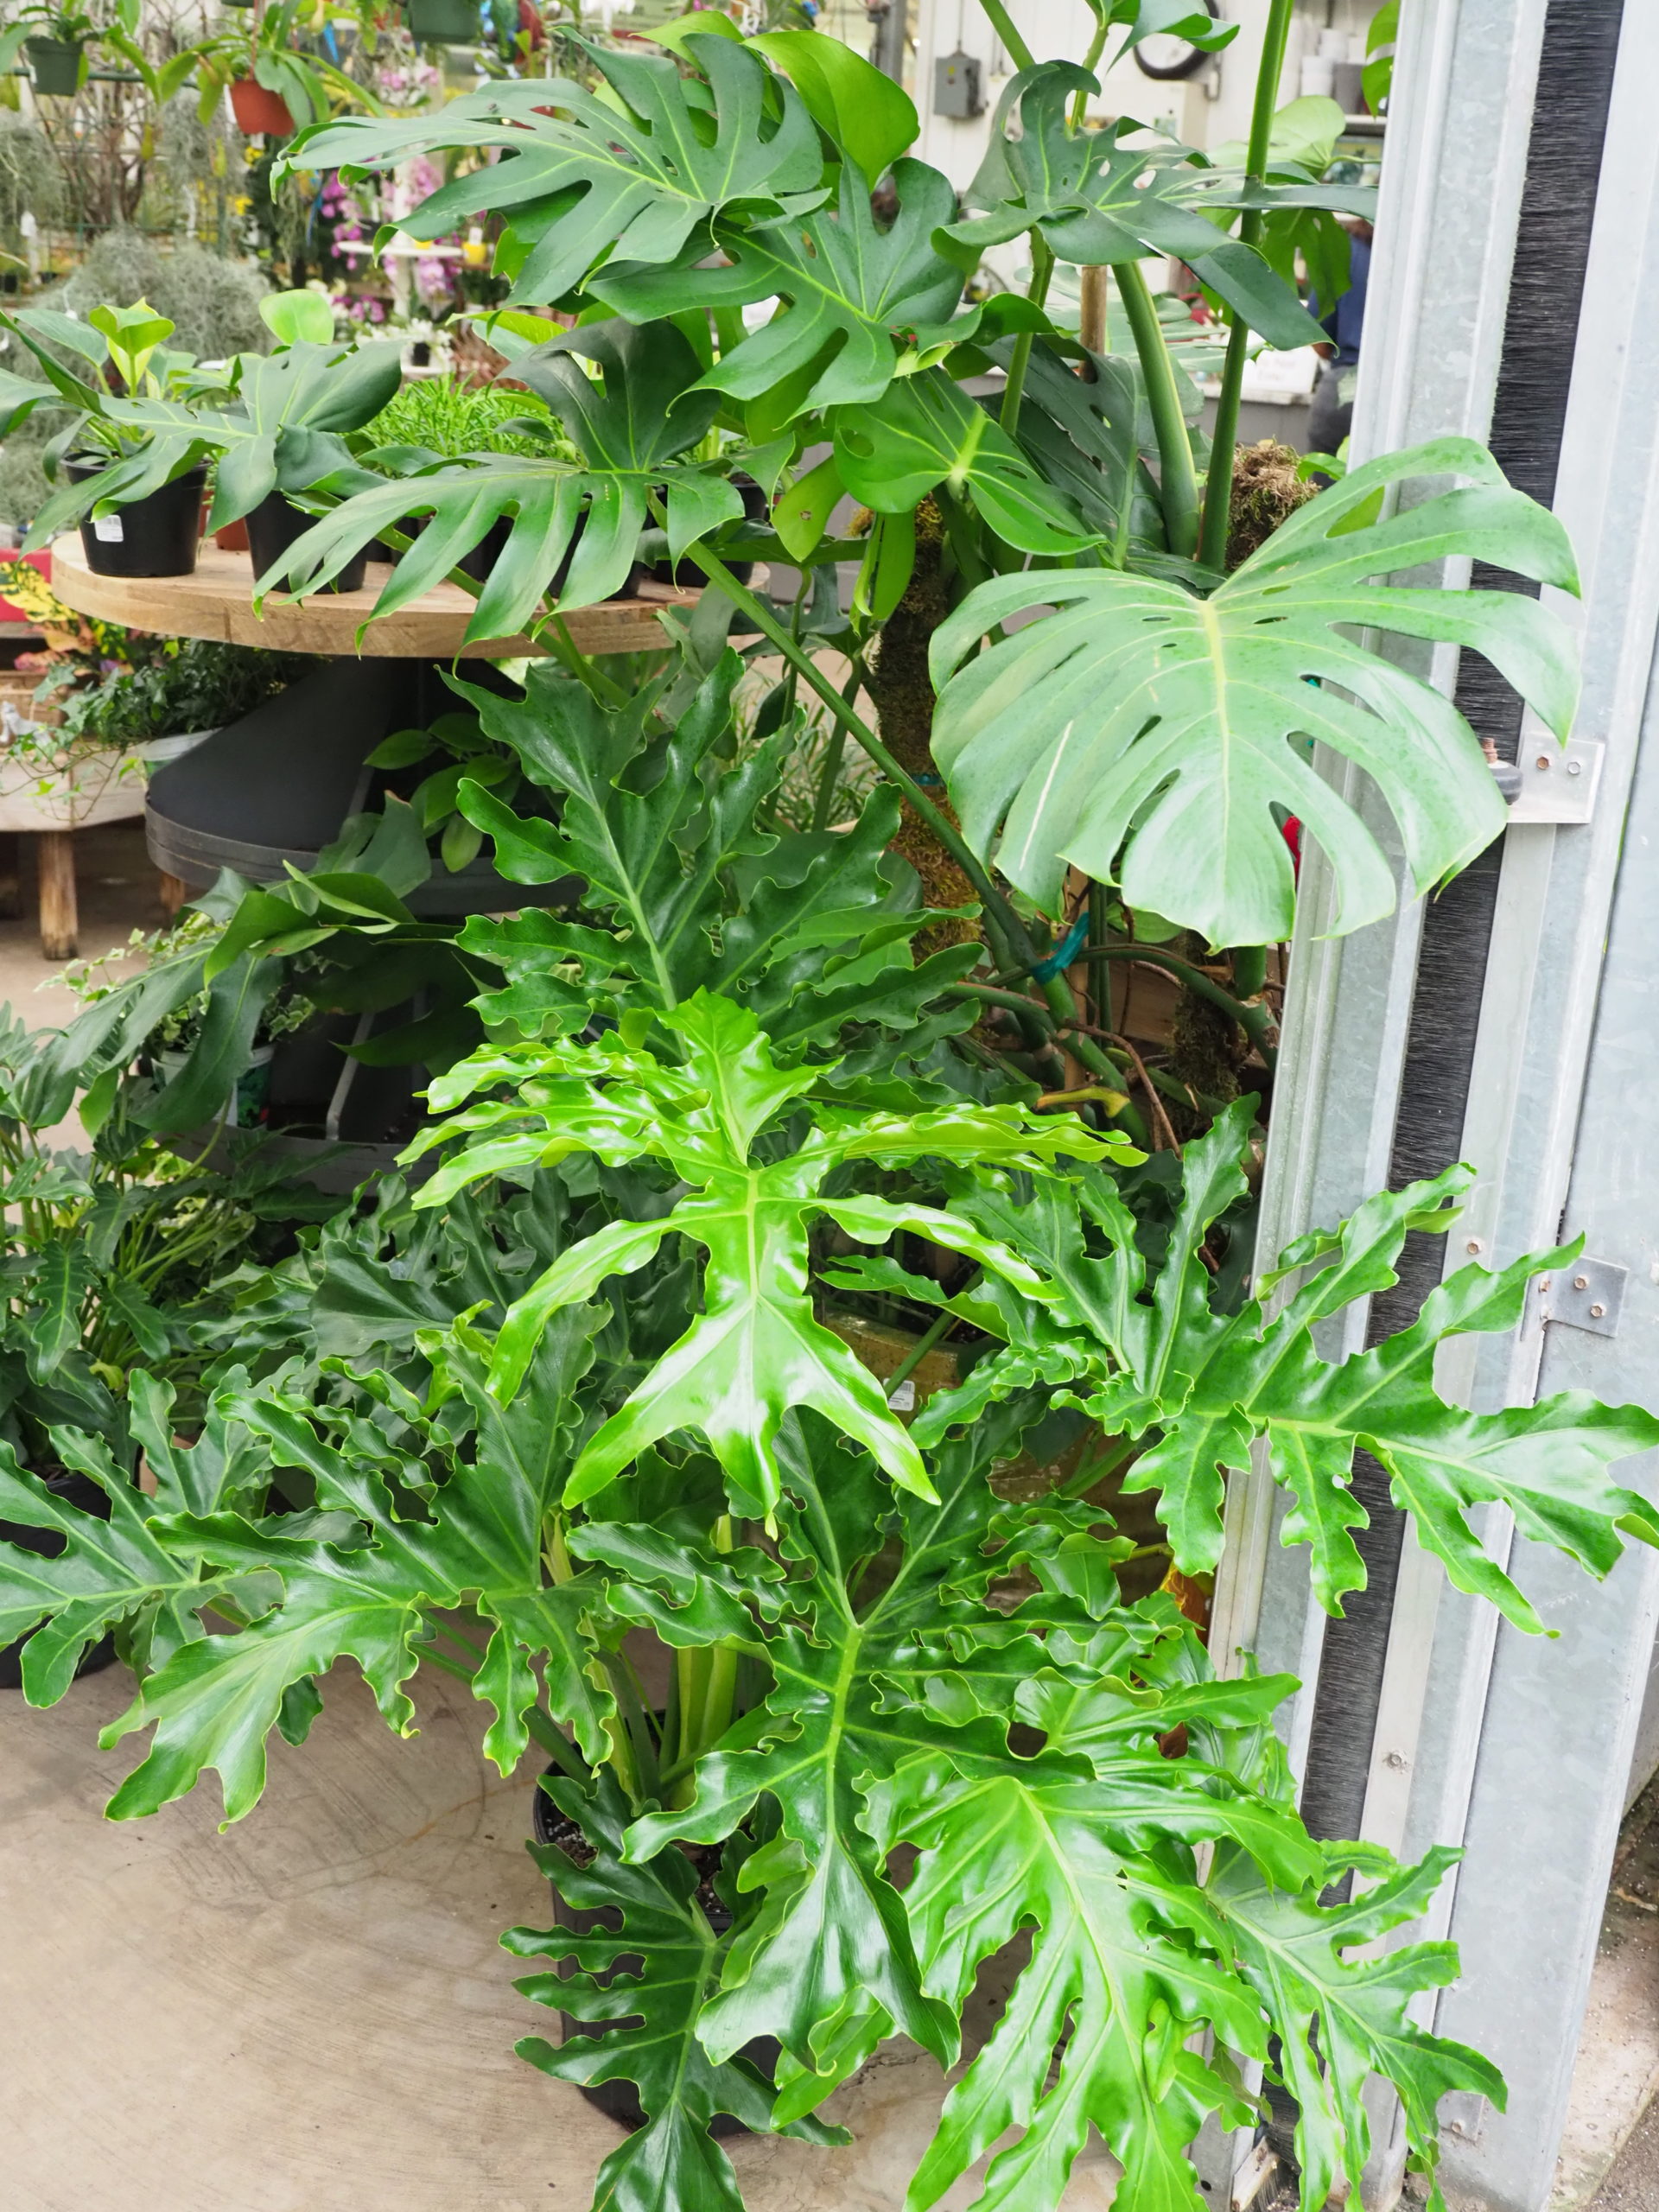 Selloum philodendrons make good low-to-moderate-light houseplants, but vine types should be trained on a stake. Most vine plants want to climb. Easily managed with pruning, there are several varieties. No real serious insect or disease issues.